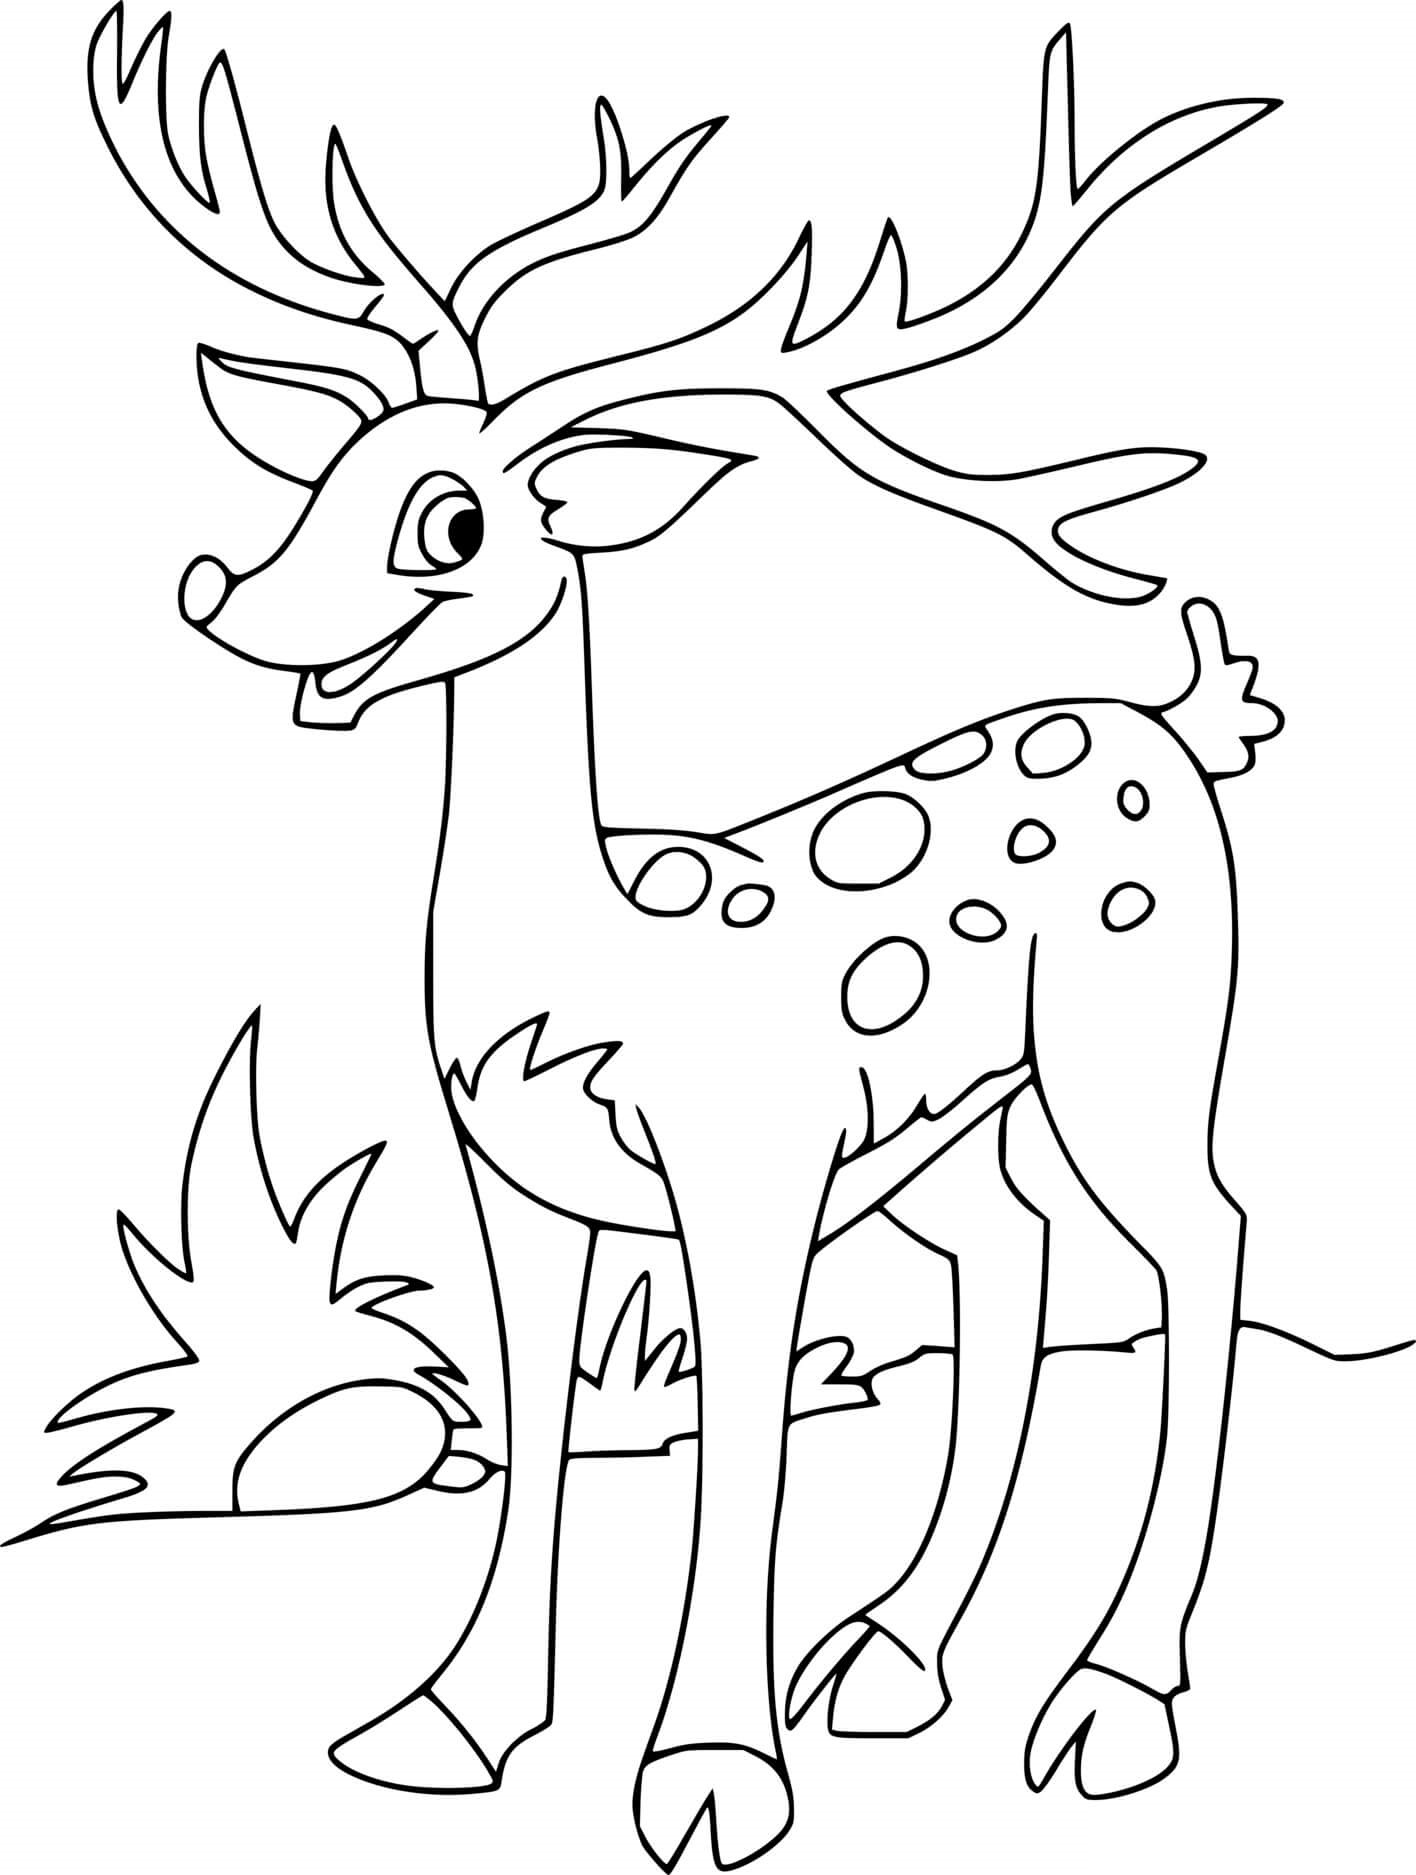 Cartoon Spotted Deer Coloring Page